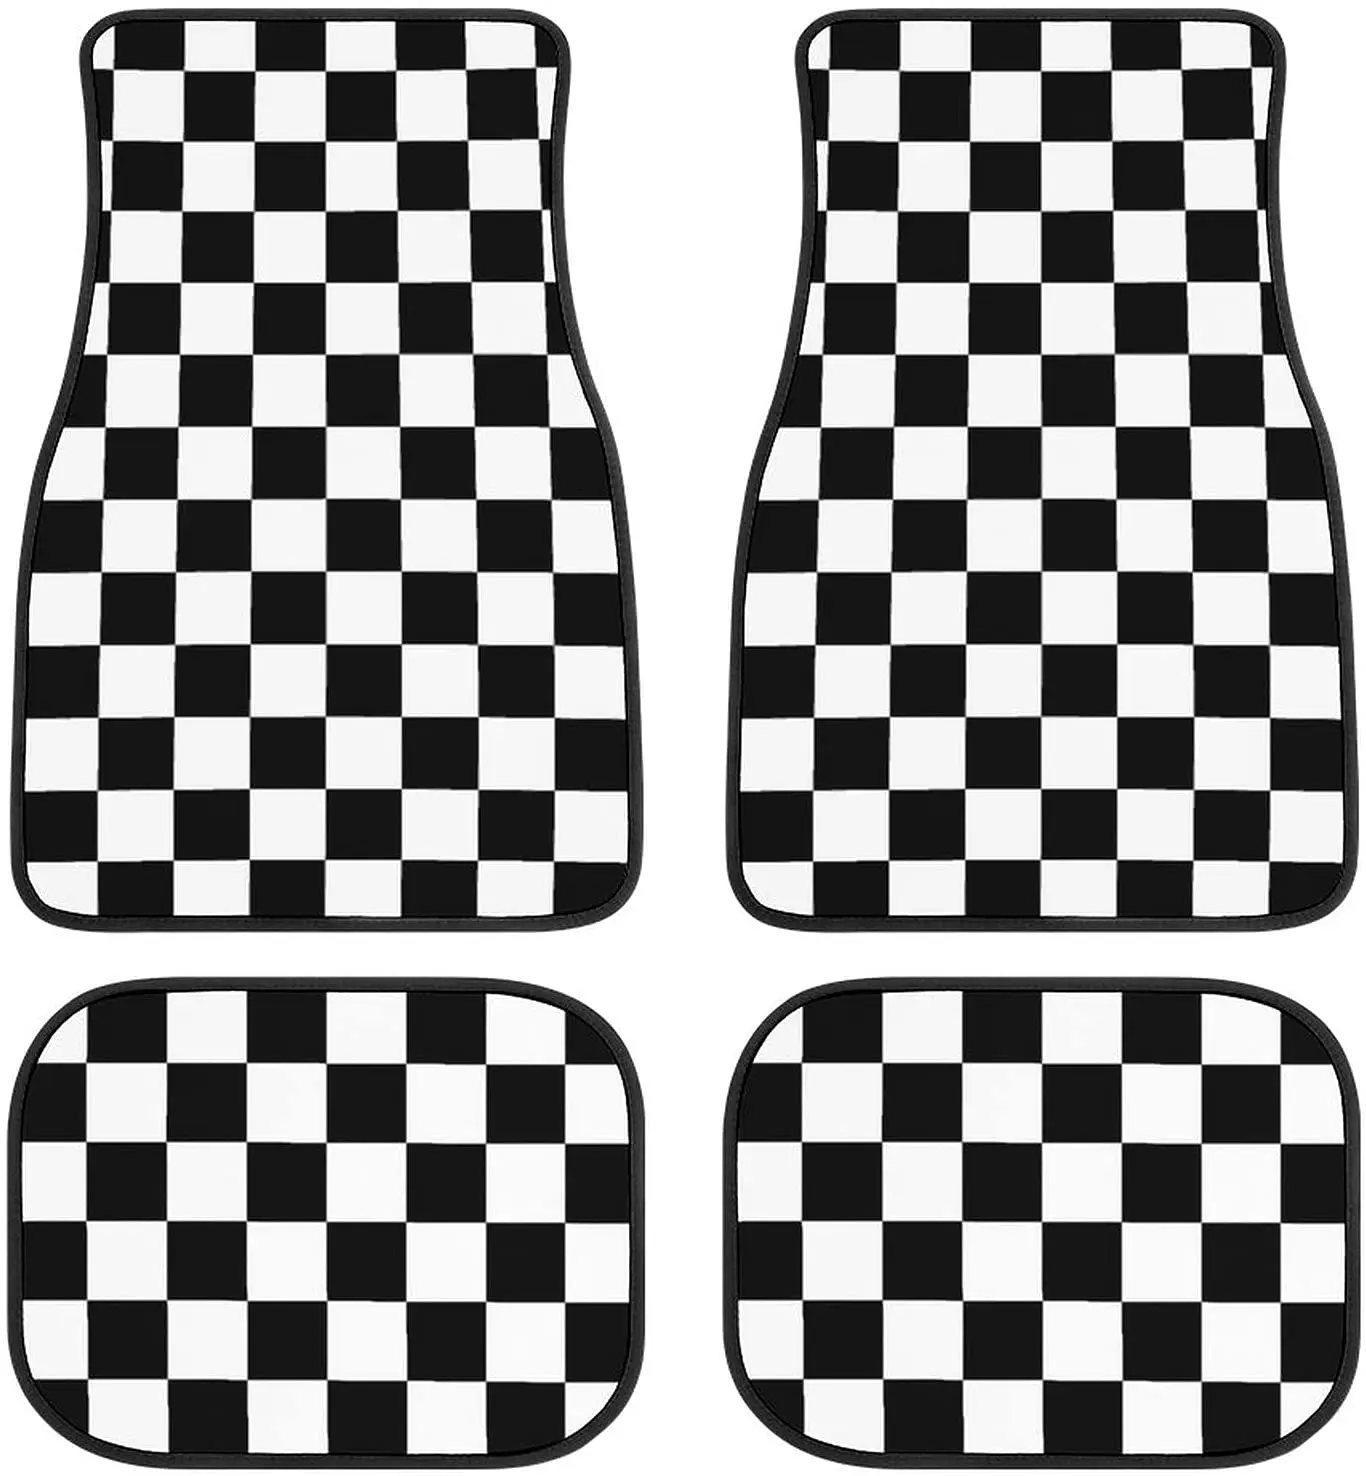 

Bagea-Ka Black White Race Checkered Flag Pattern Car Floor Mats 4-Piece Front Rear Protection Set Carpet Universal All Weather